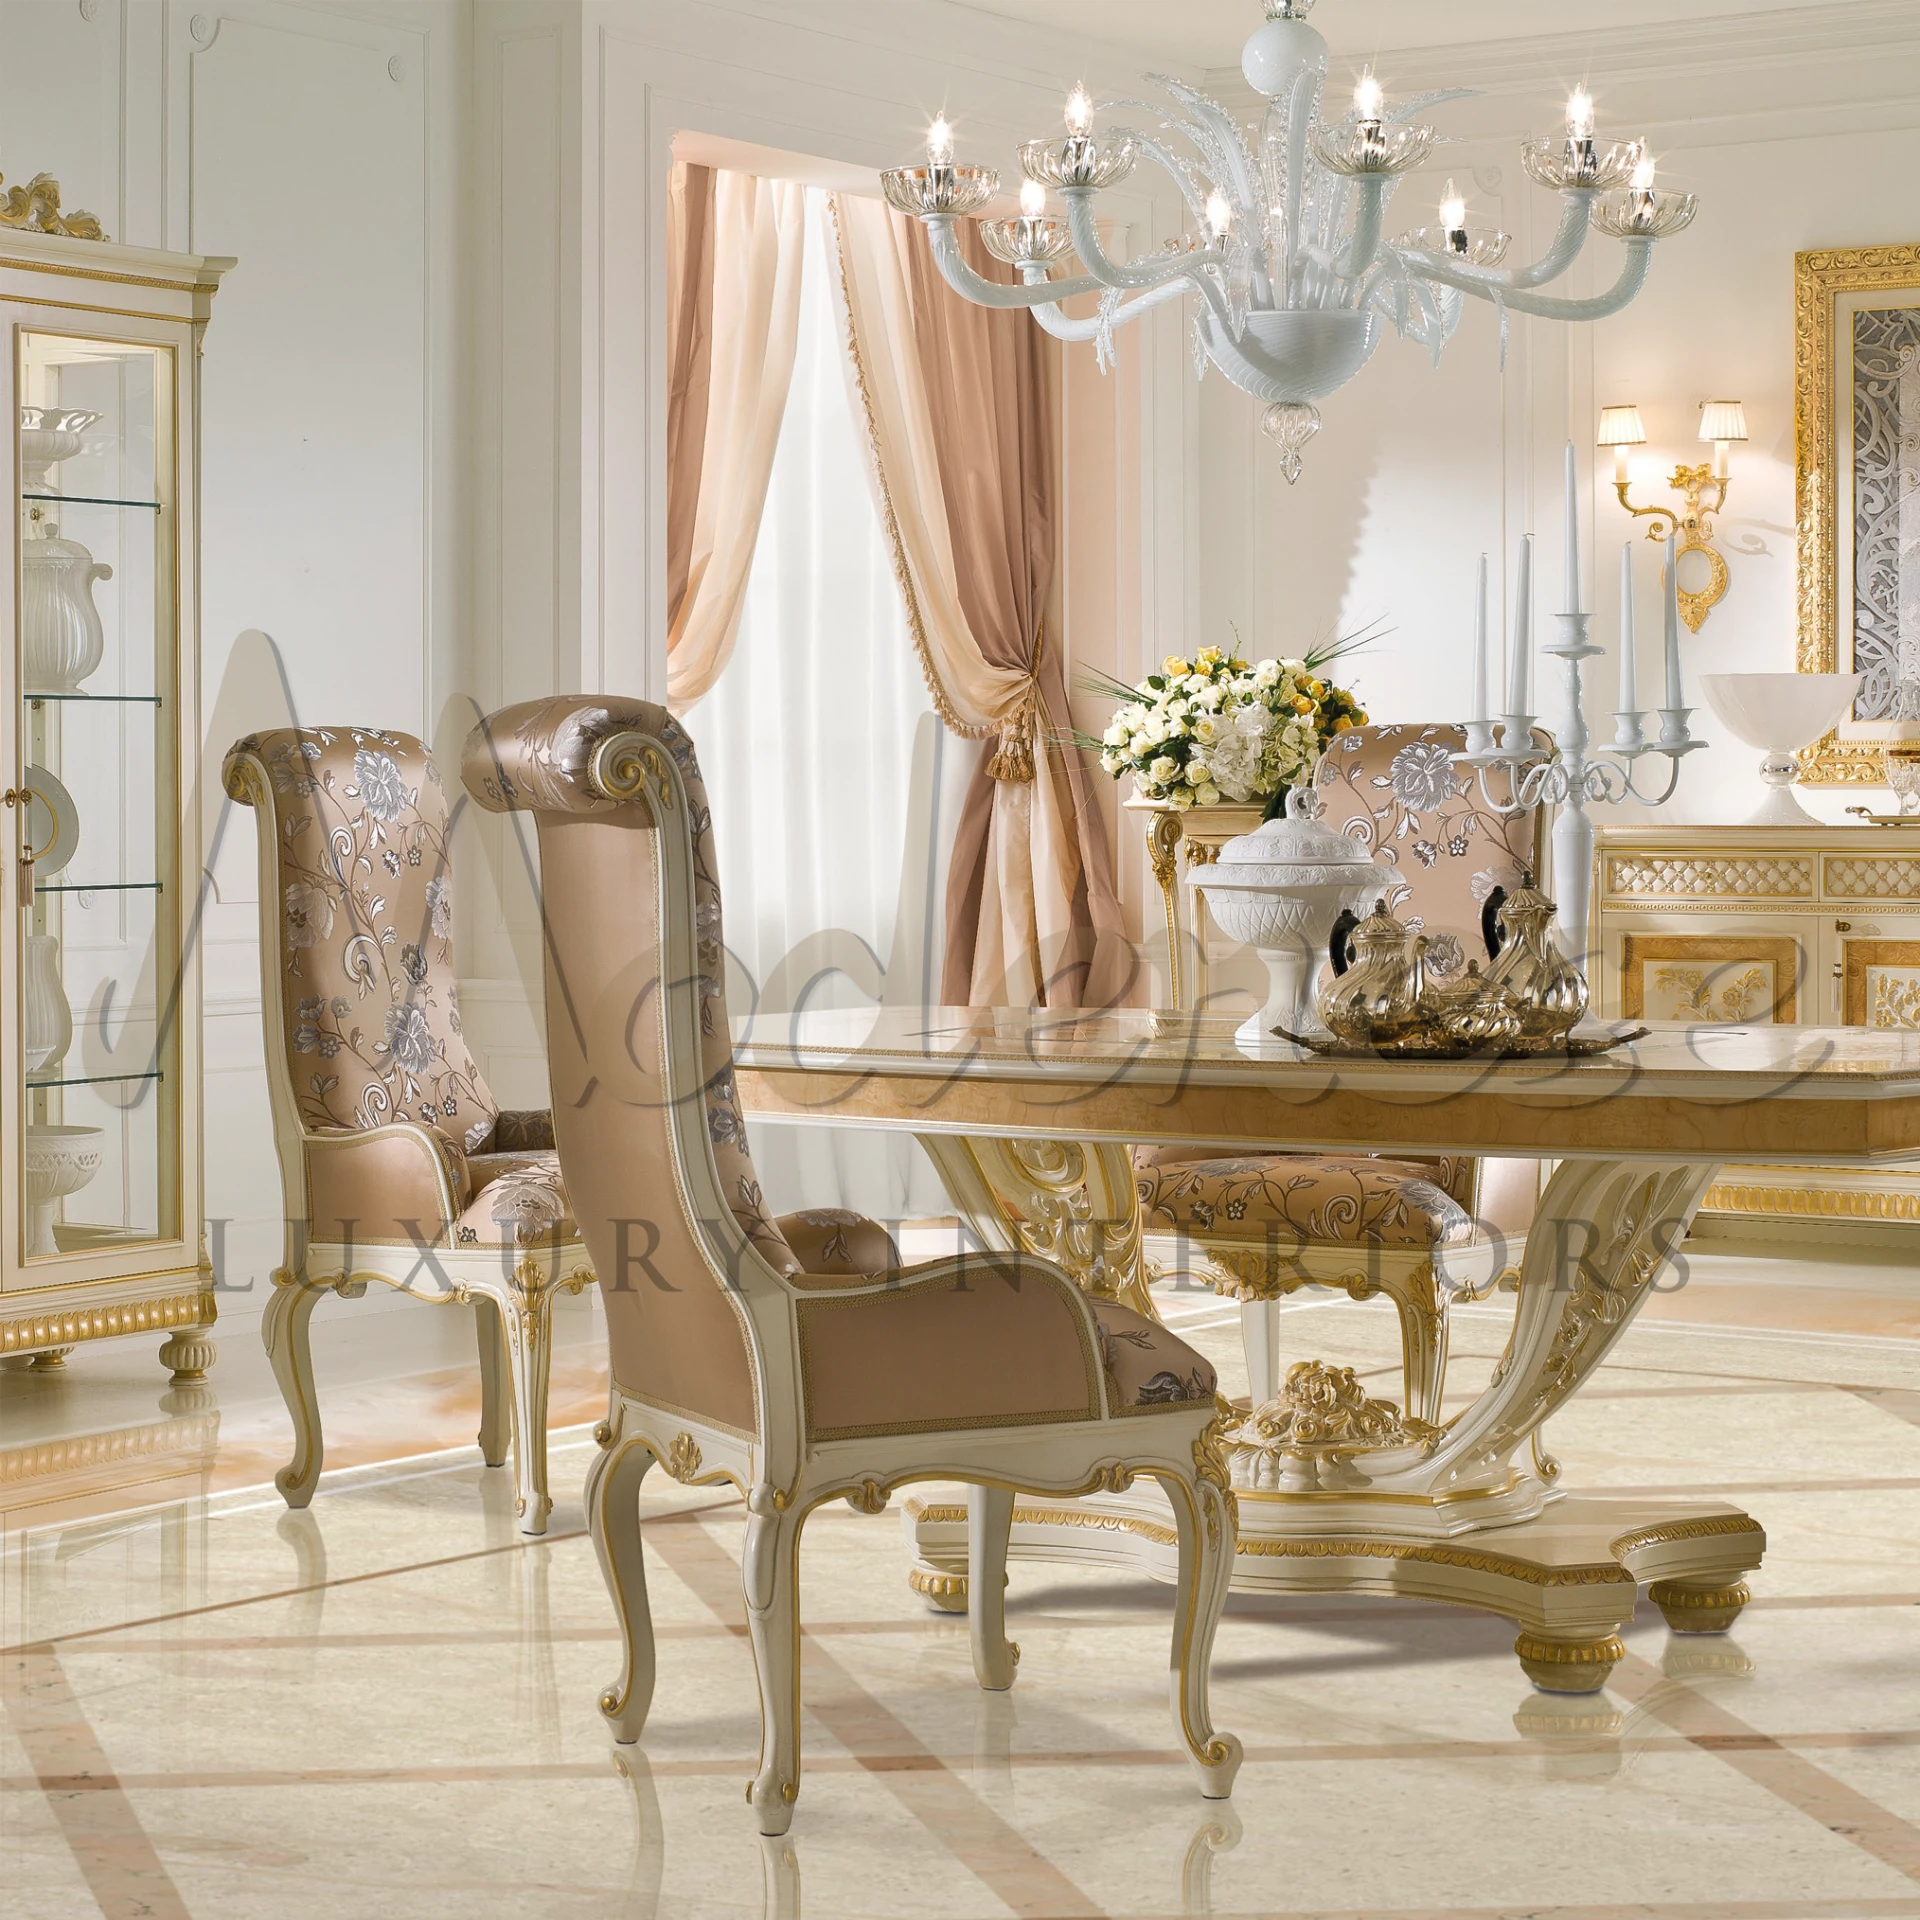 Exquisite window dressings, the Elegant Cream Curtains, offer timeless beauty and high-quality craftsmanship from Italy.